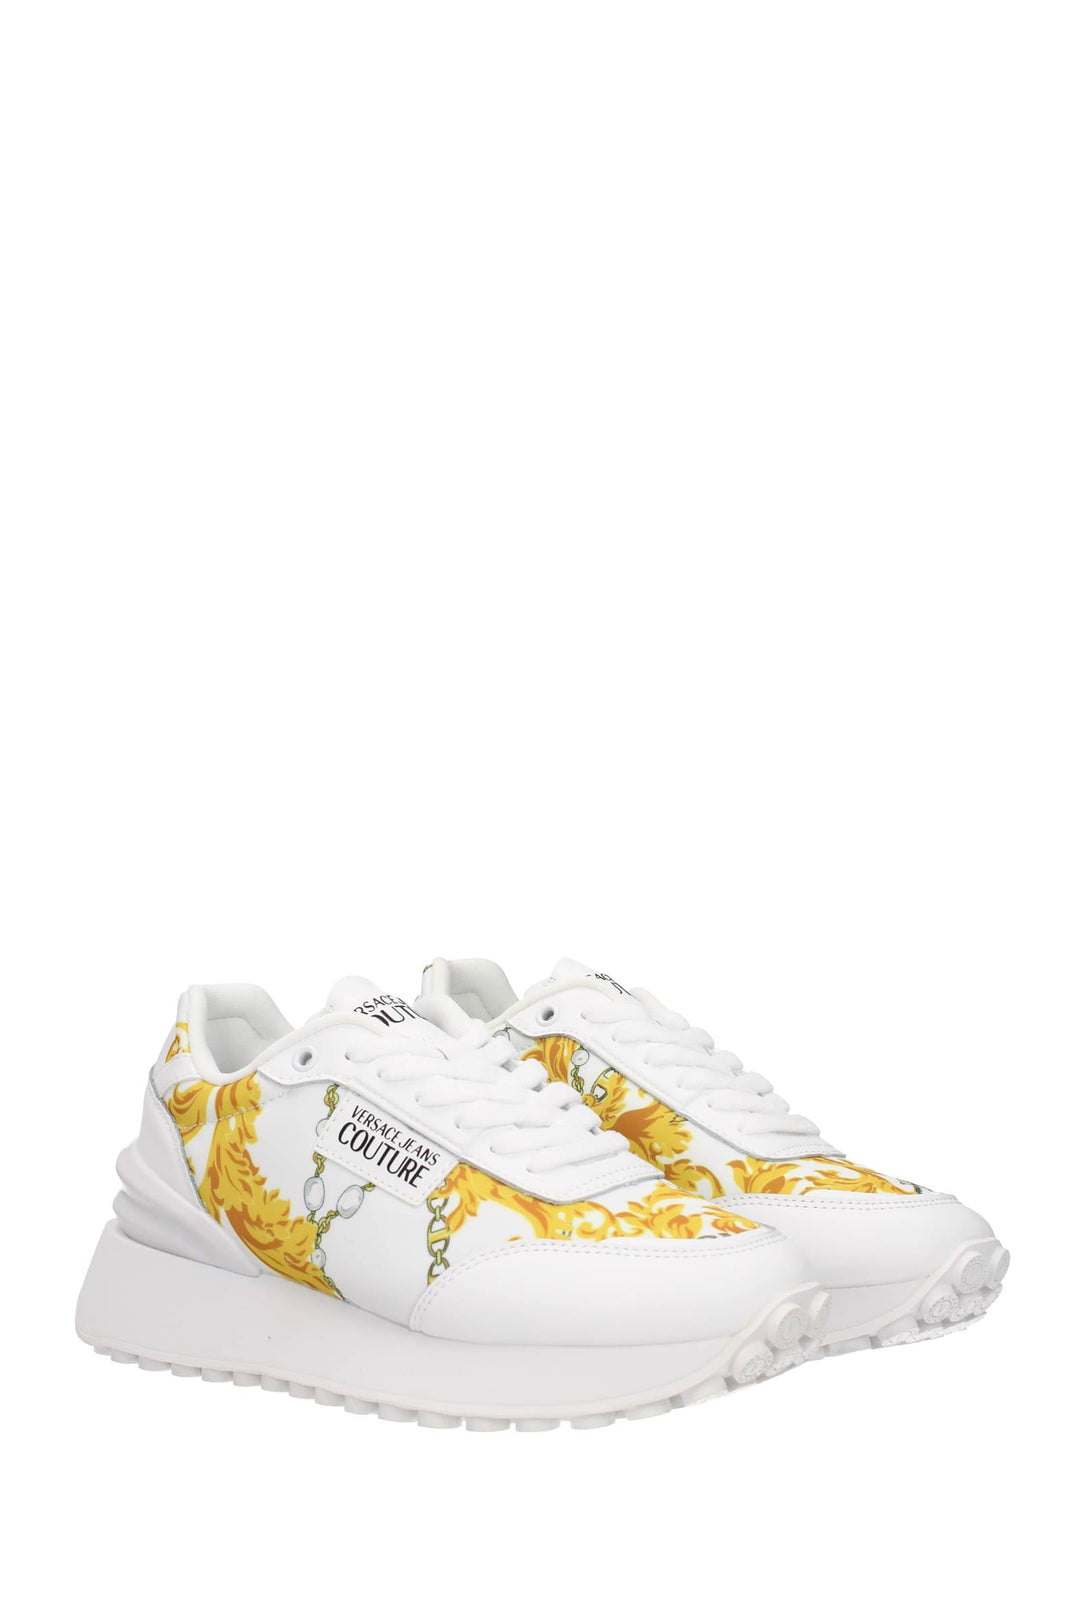 Versace Jeans Sneakers Couture Tessuto Bianco - Versace Jeans Couture - Donna